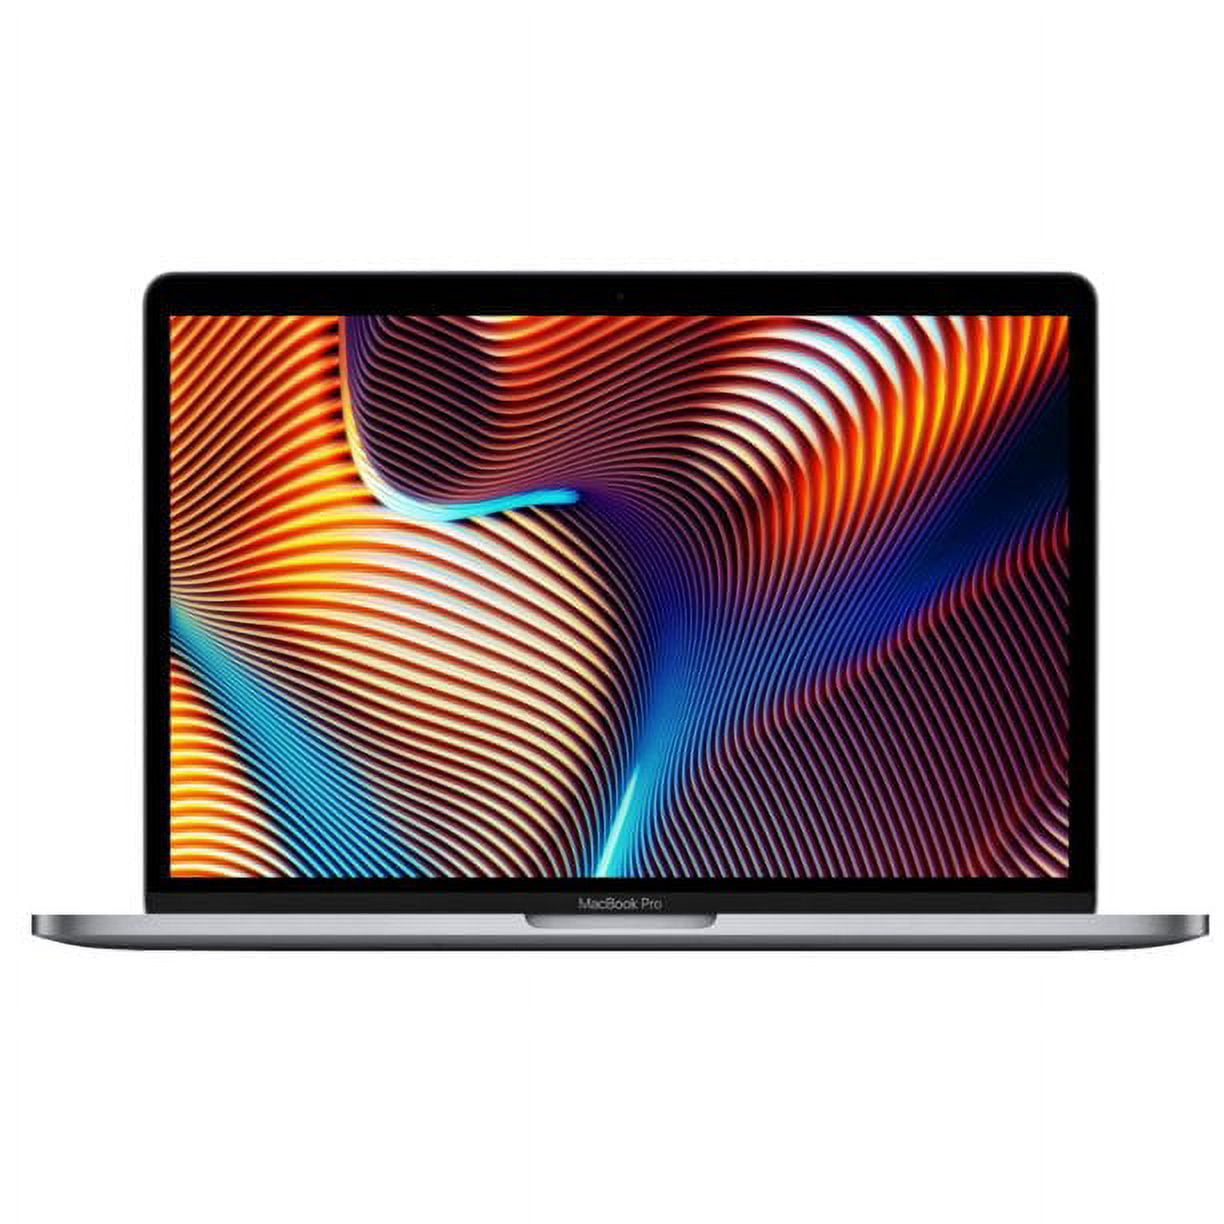 Excellent Grade Macbook Pro 13.3-inch (Retina, Space Gray, Touch